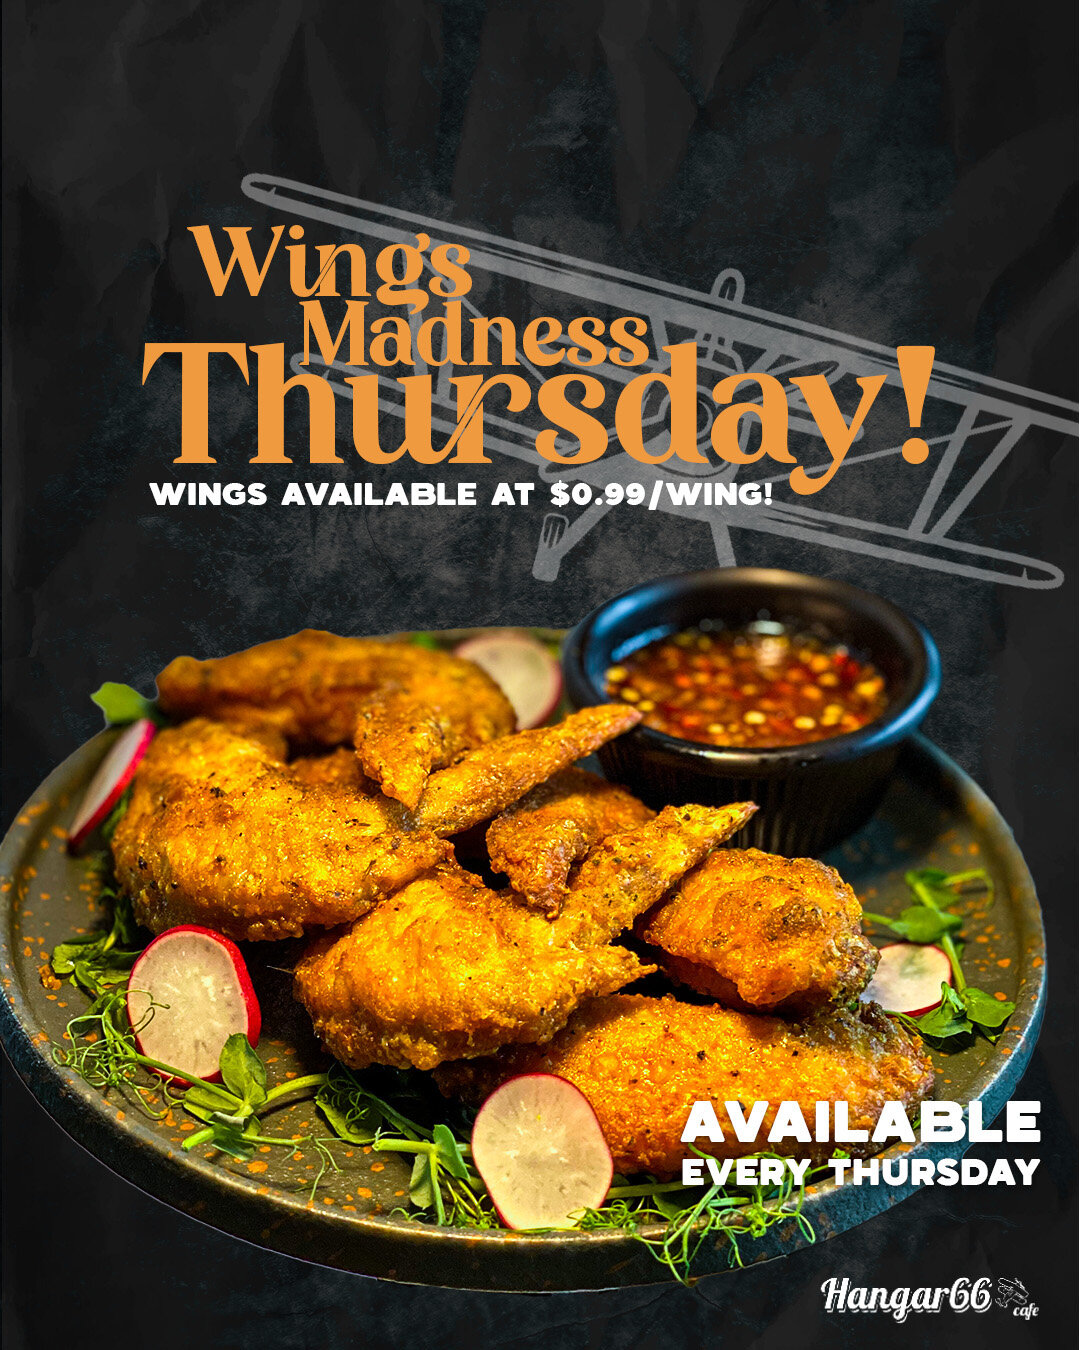 Get ready to go wild with our Wings Madness Thursday 🍗🔥

For only $0.99 per wing, satisfy your cravings with our succulent and juicy chicken wings that are sure to tantalise your taste buds.

Join us every Thursday for a finger-licking good time th